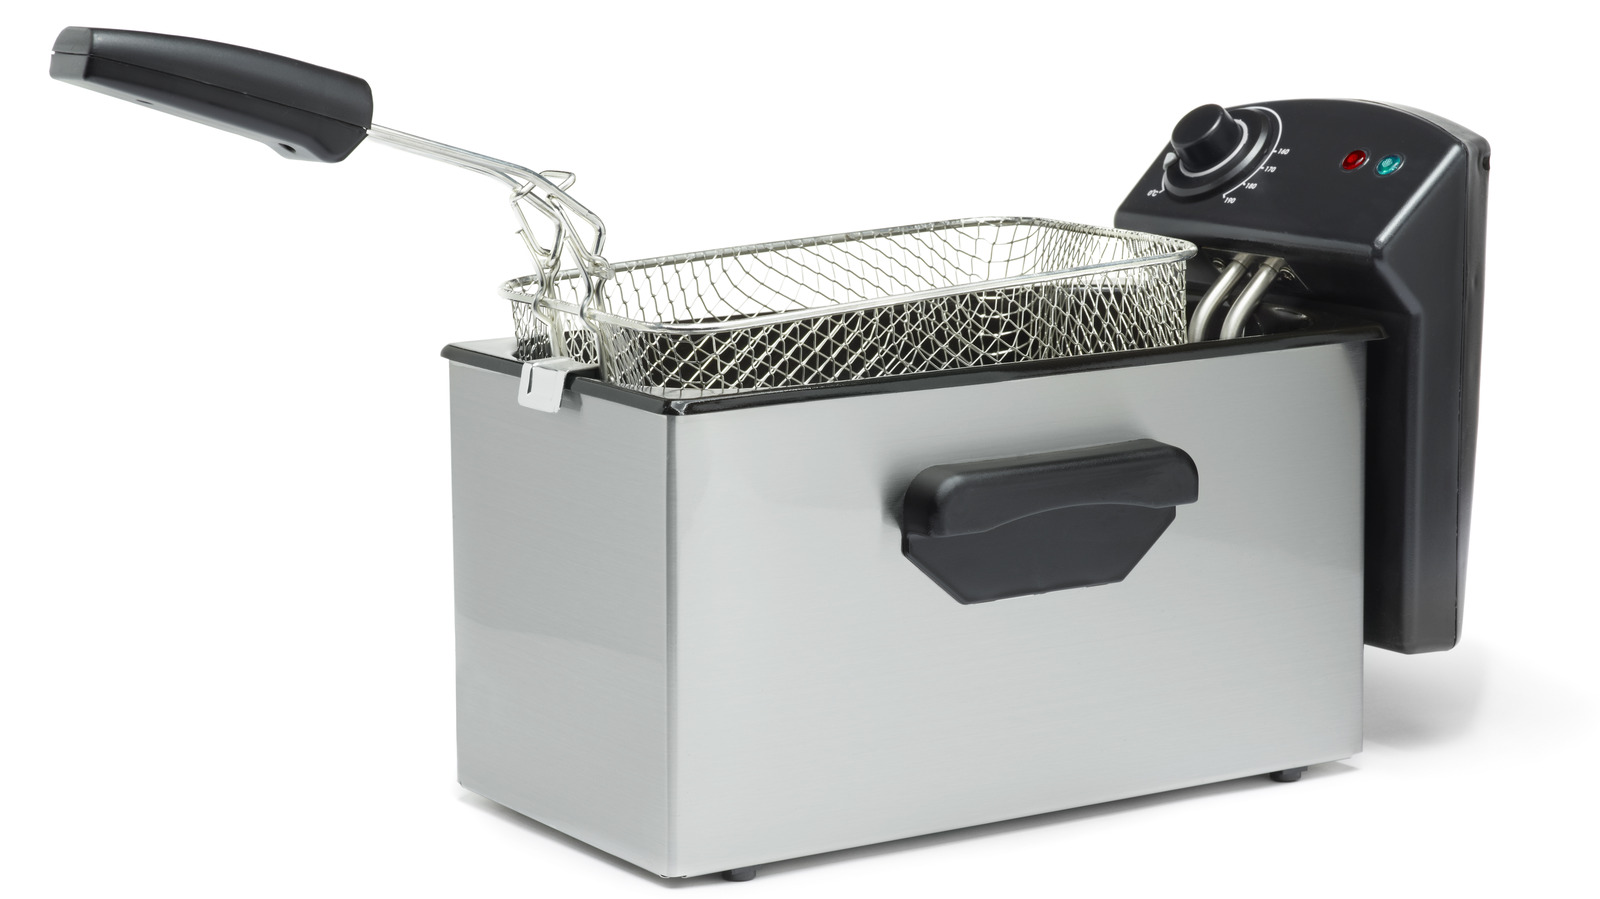 How to Clean a Deep Fryer: Boiling Out & Grease Disposal